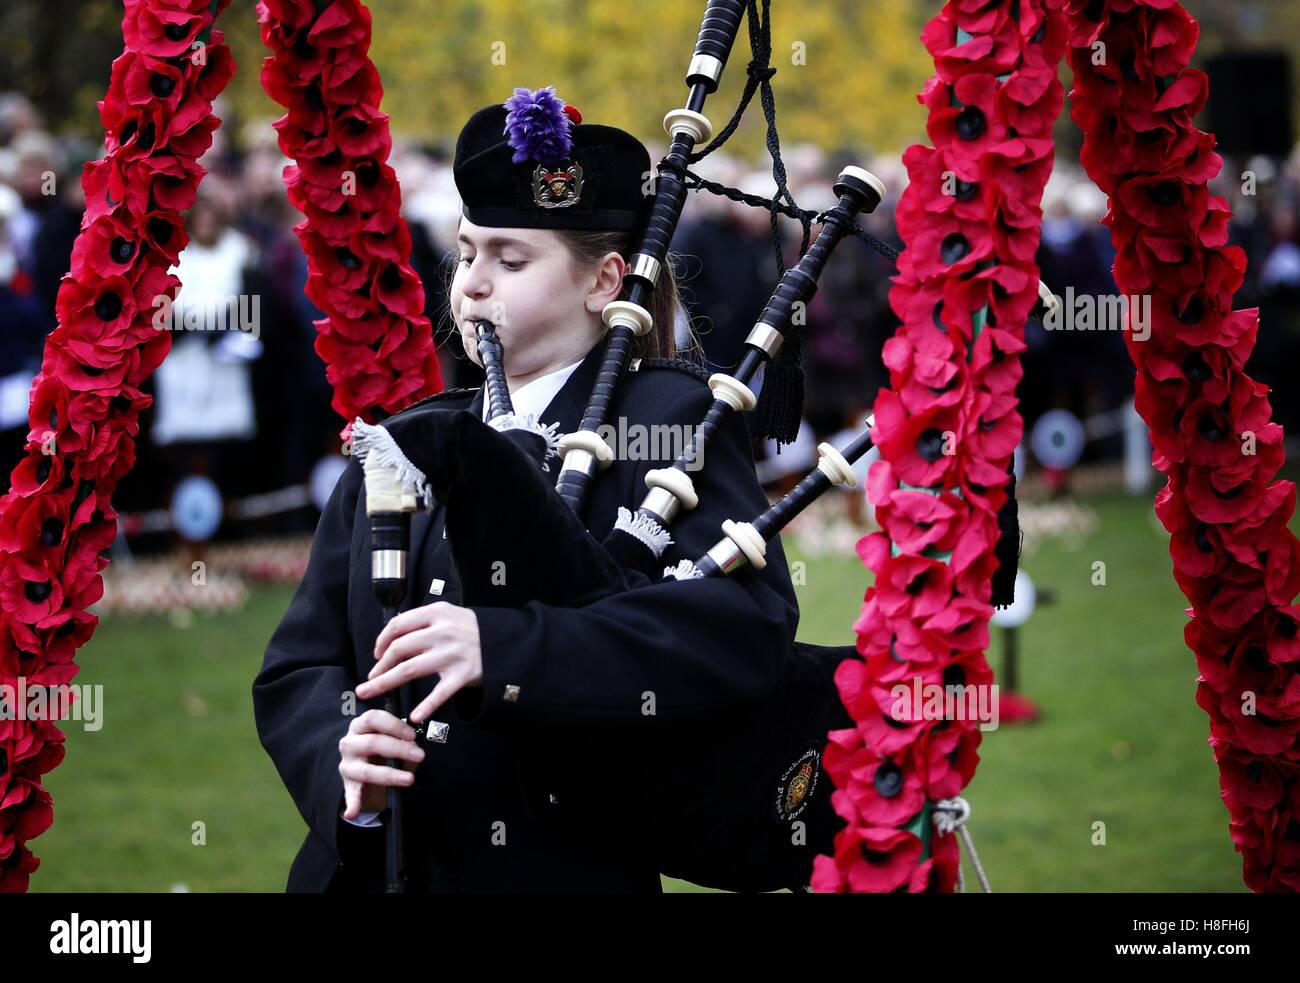 A piper plays as two minutes' silence is observed in Princes Street Gardens, Edinburgh, to mark Armistice Day, the anniversary of the end of the First World War. Stock Photo